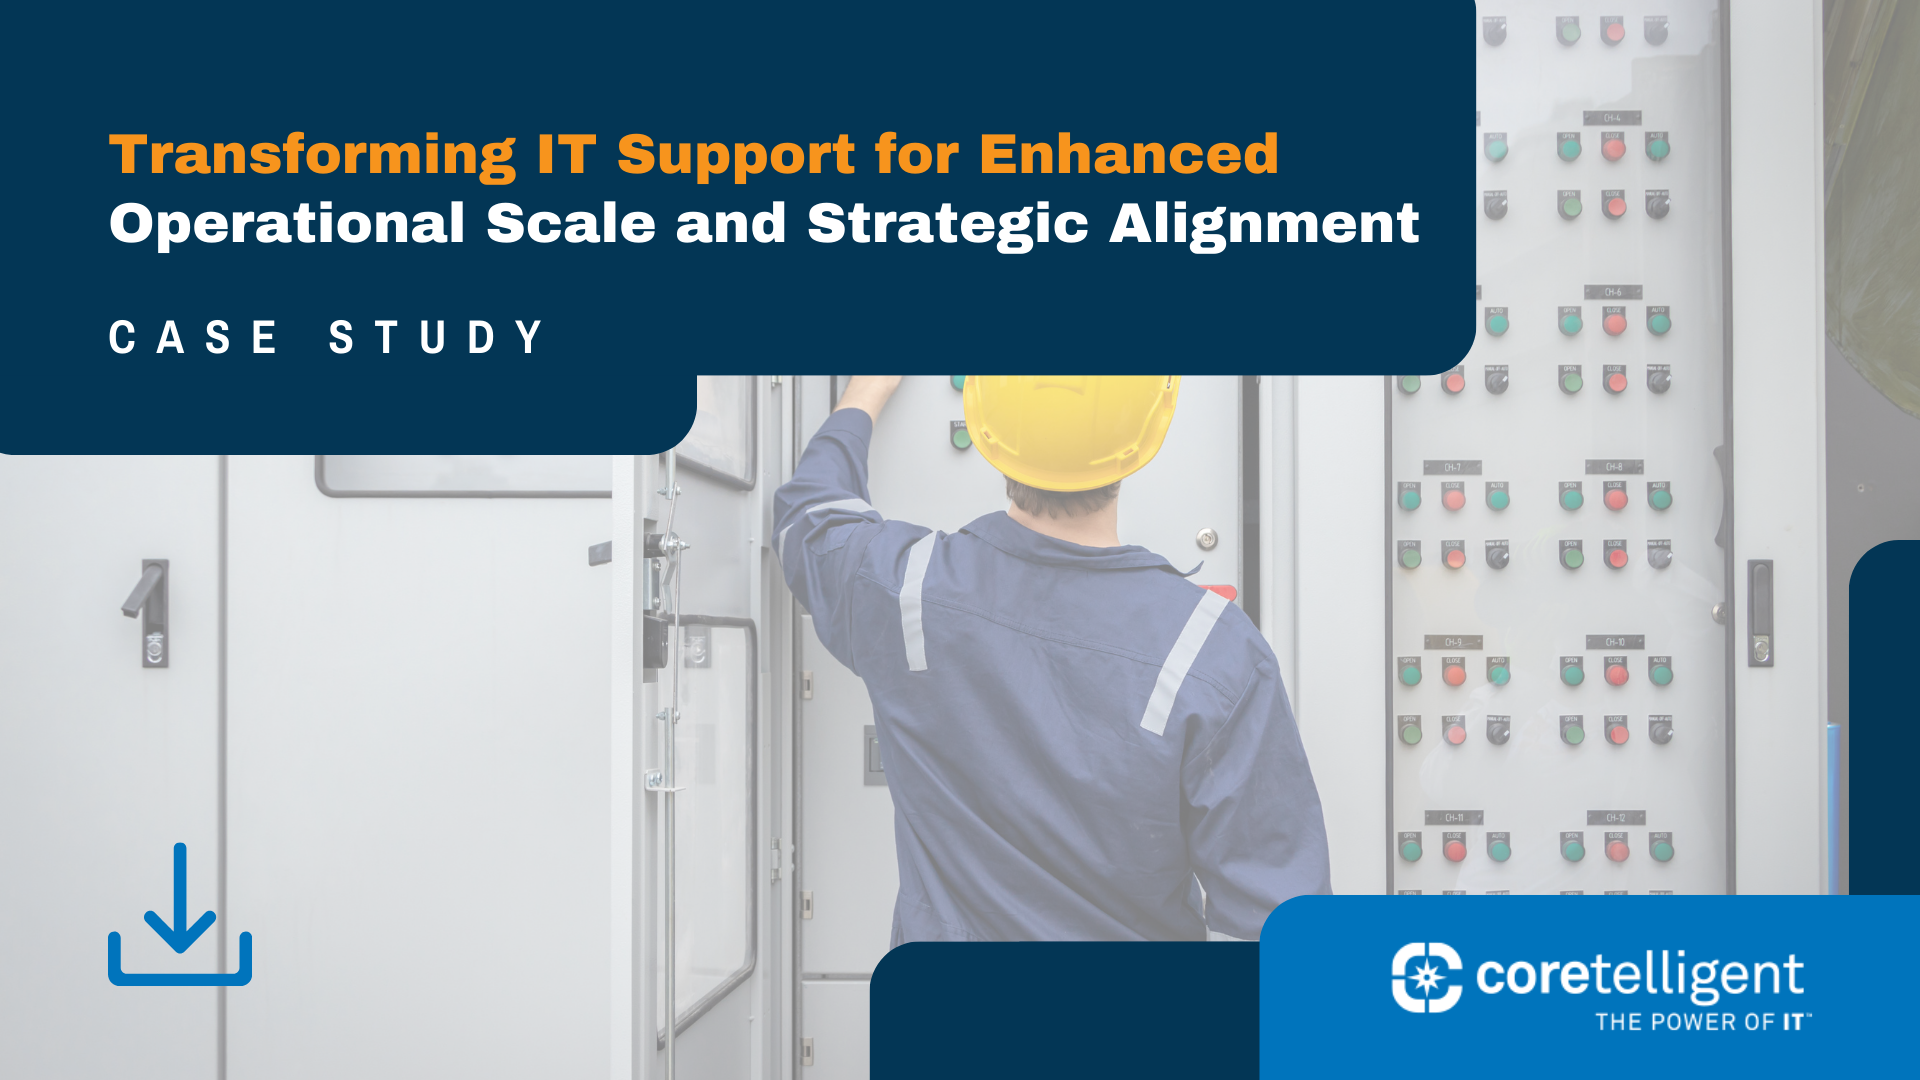 Transforming IT Support for Enhanced Operational Scale and Strategic Alignment